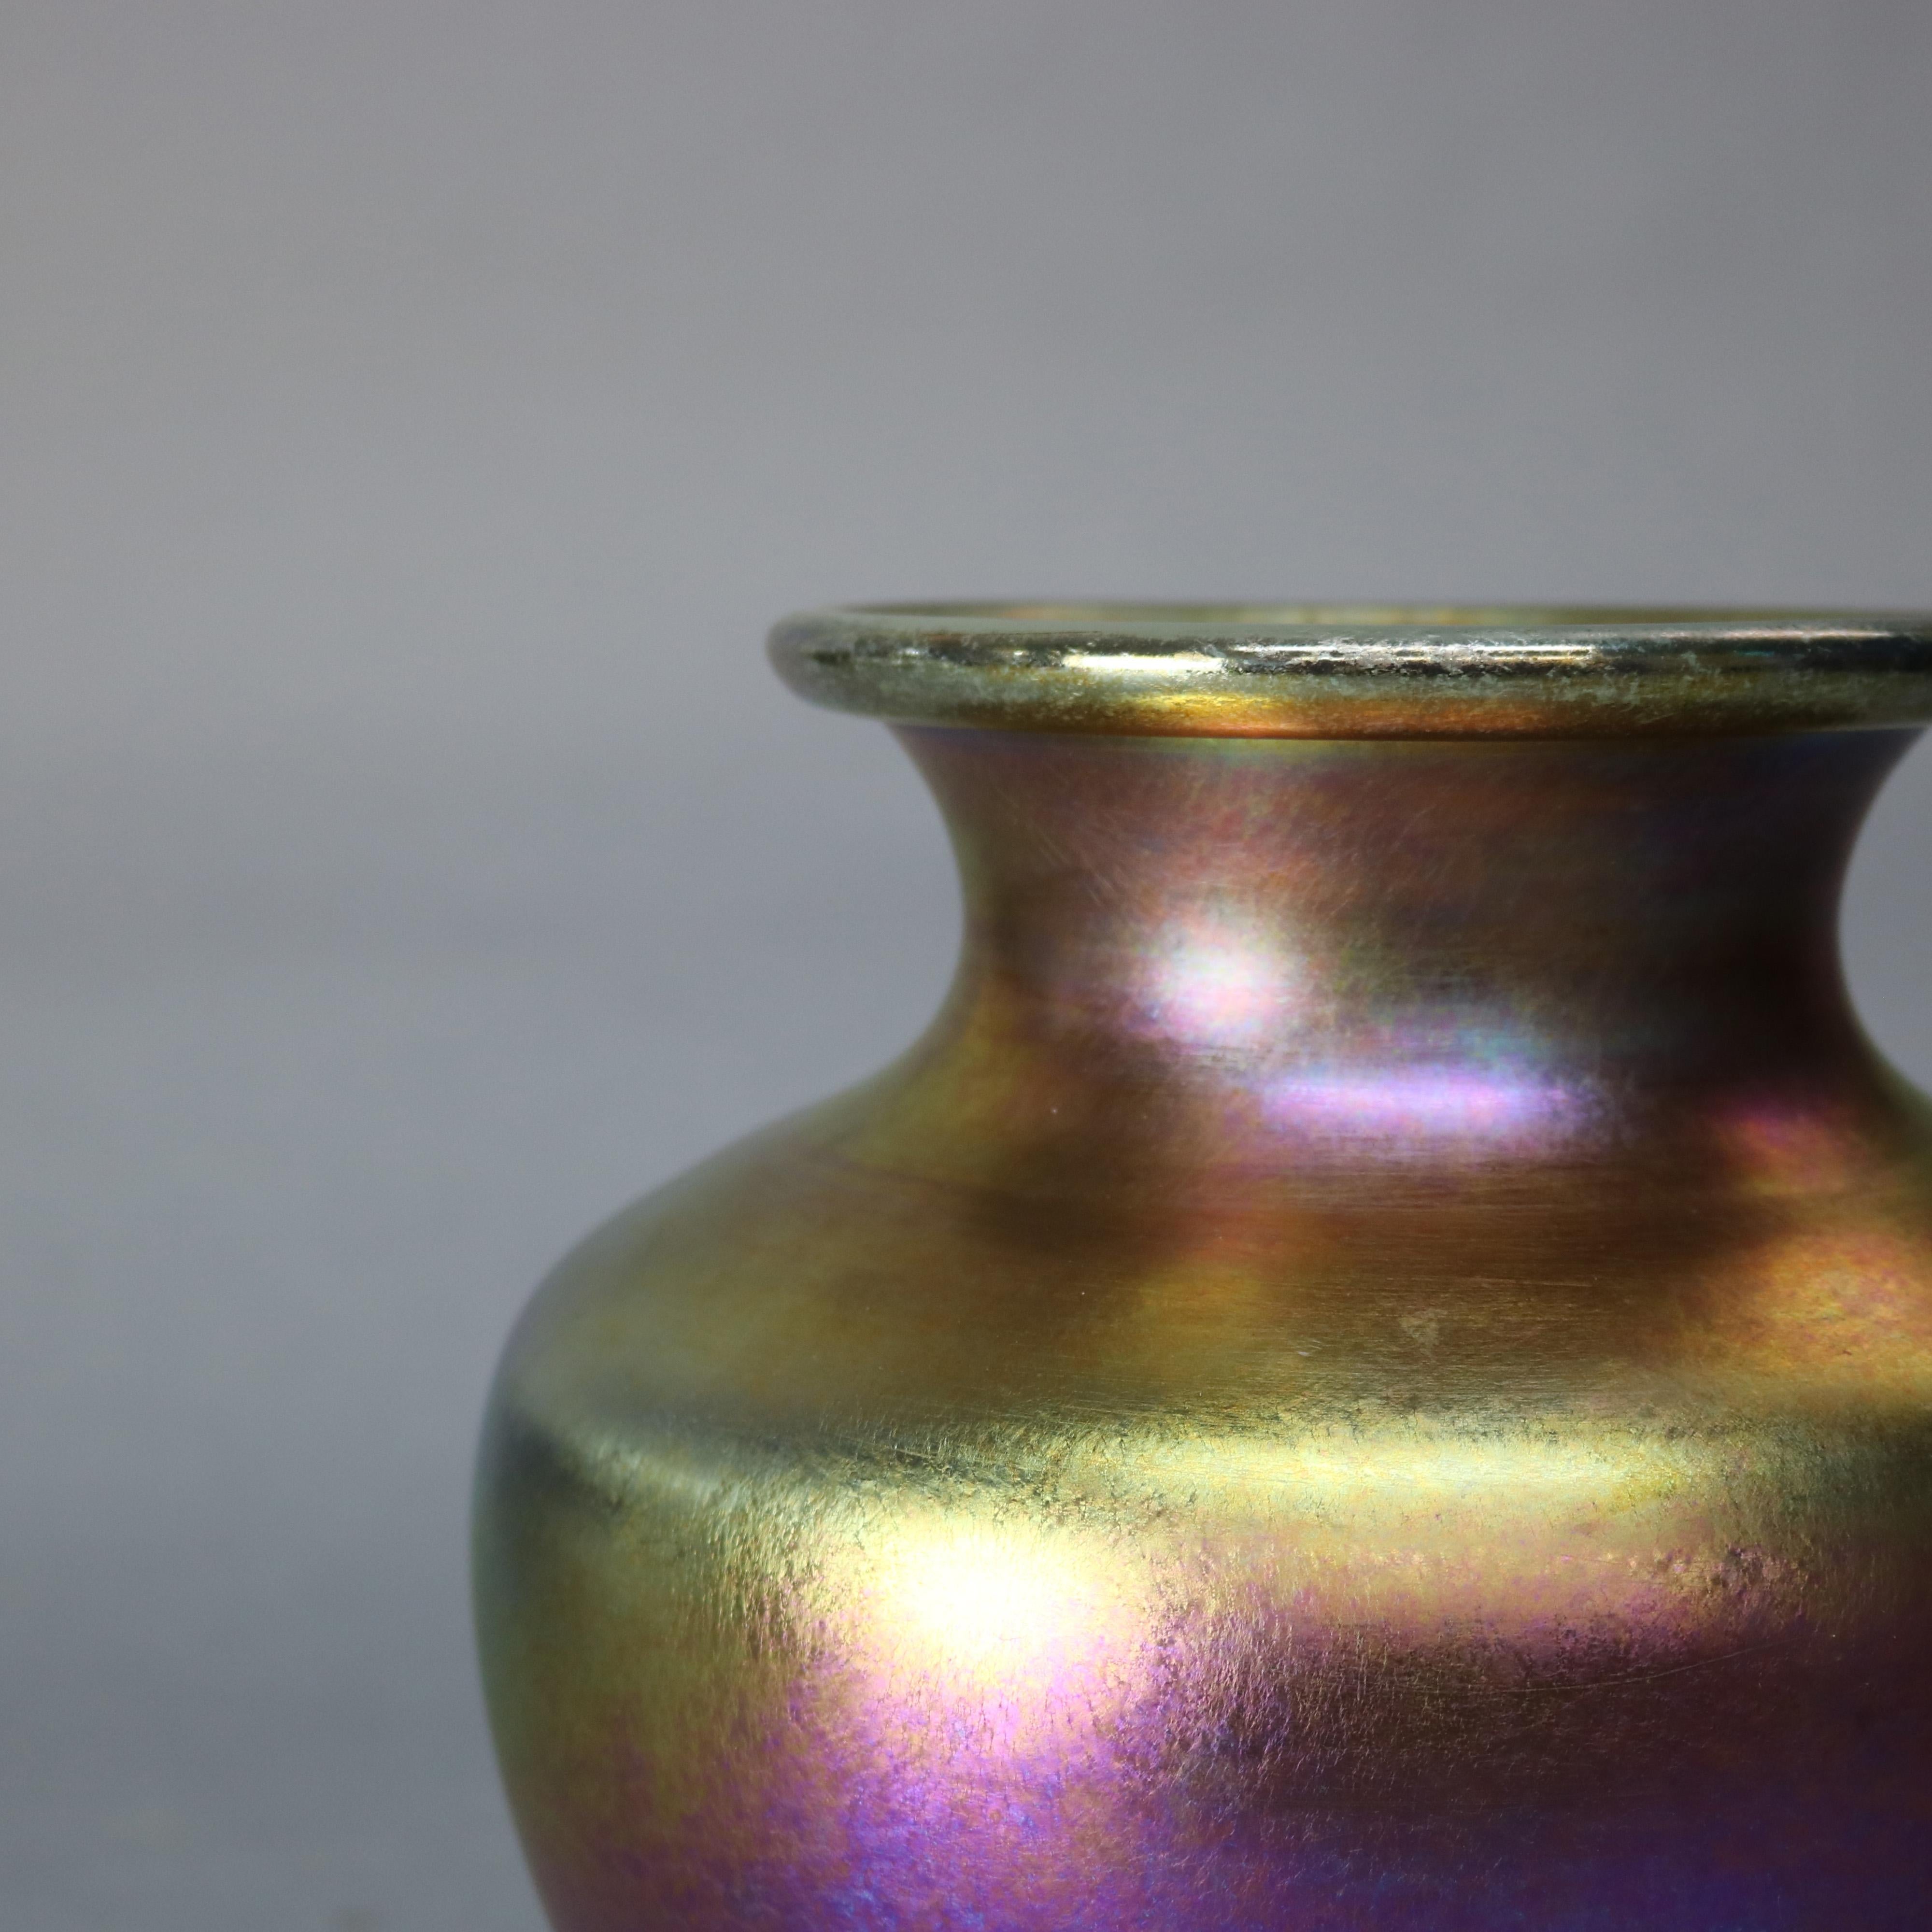 Hand-Crafted Antique Tiffany Gold Favrile Bulbous Vase, Signed L. C. Tiffany #2580 circa 1910